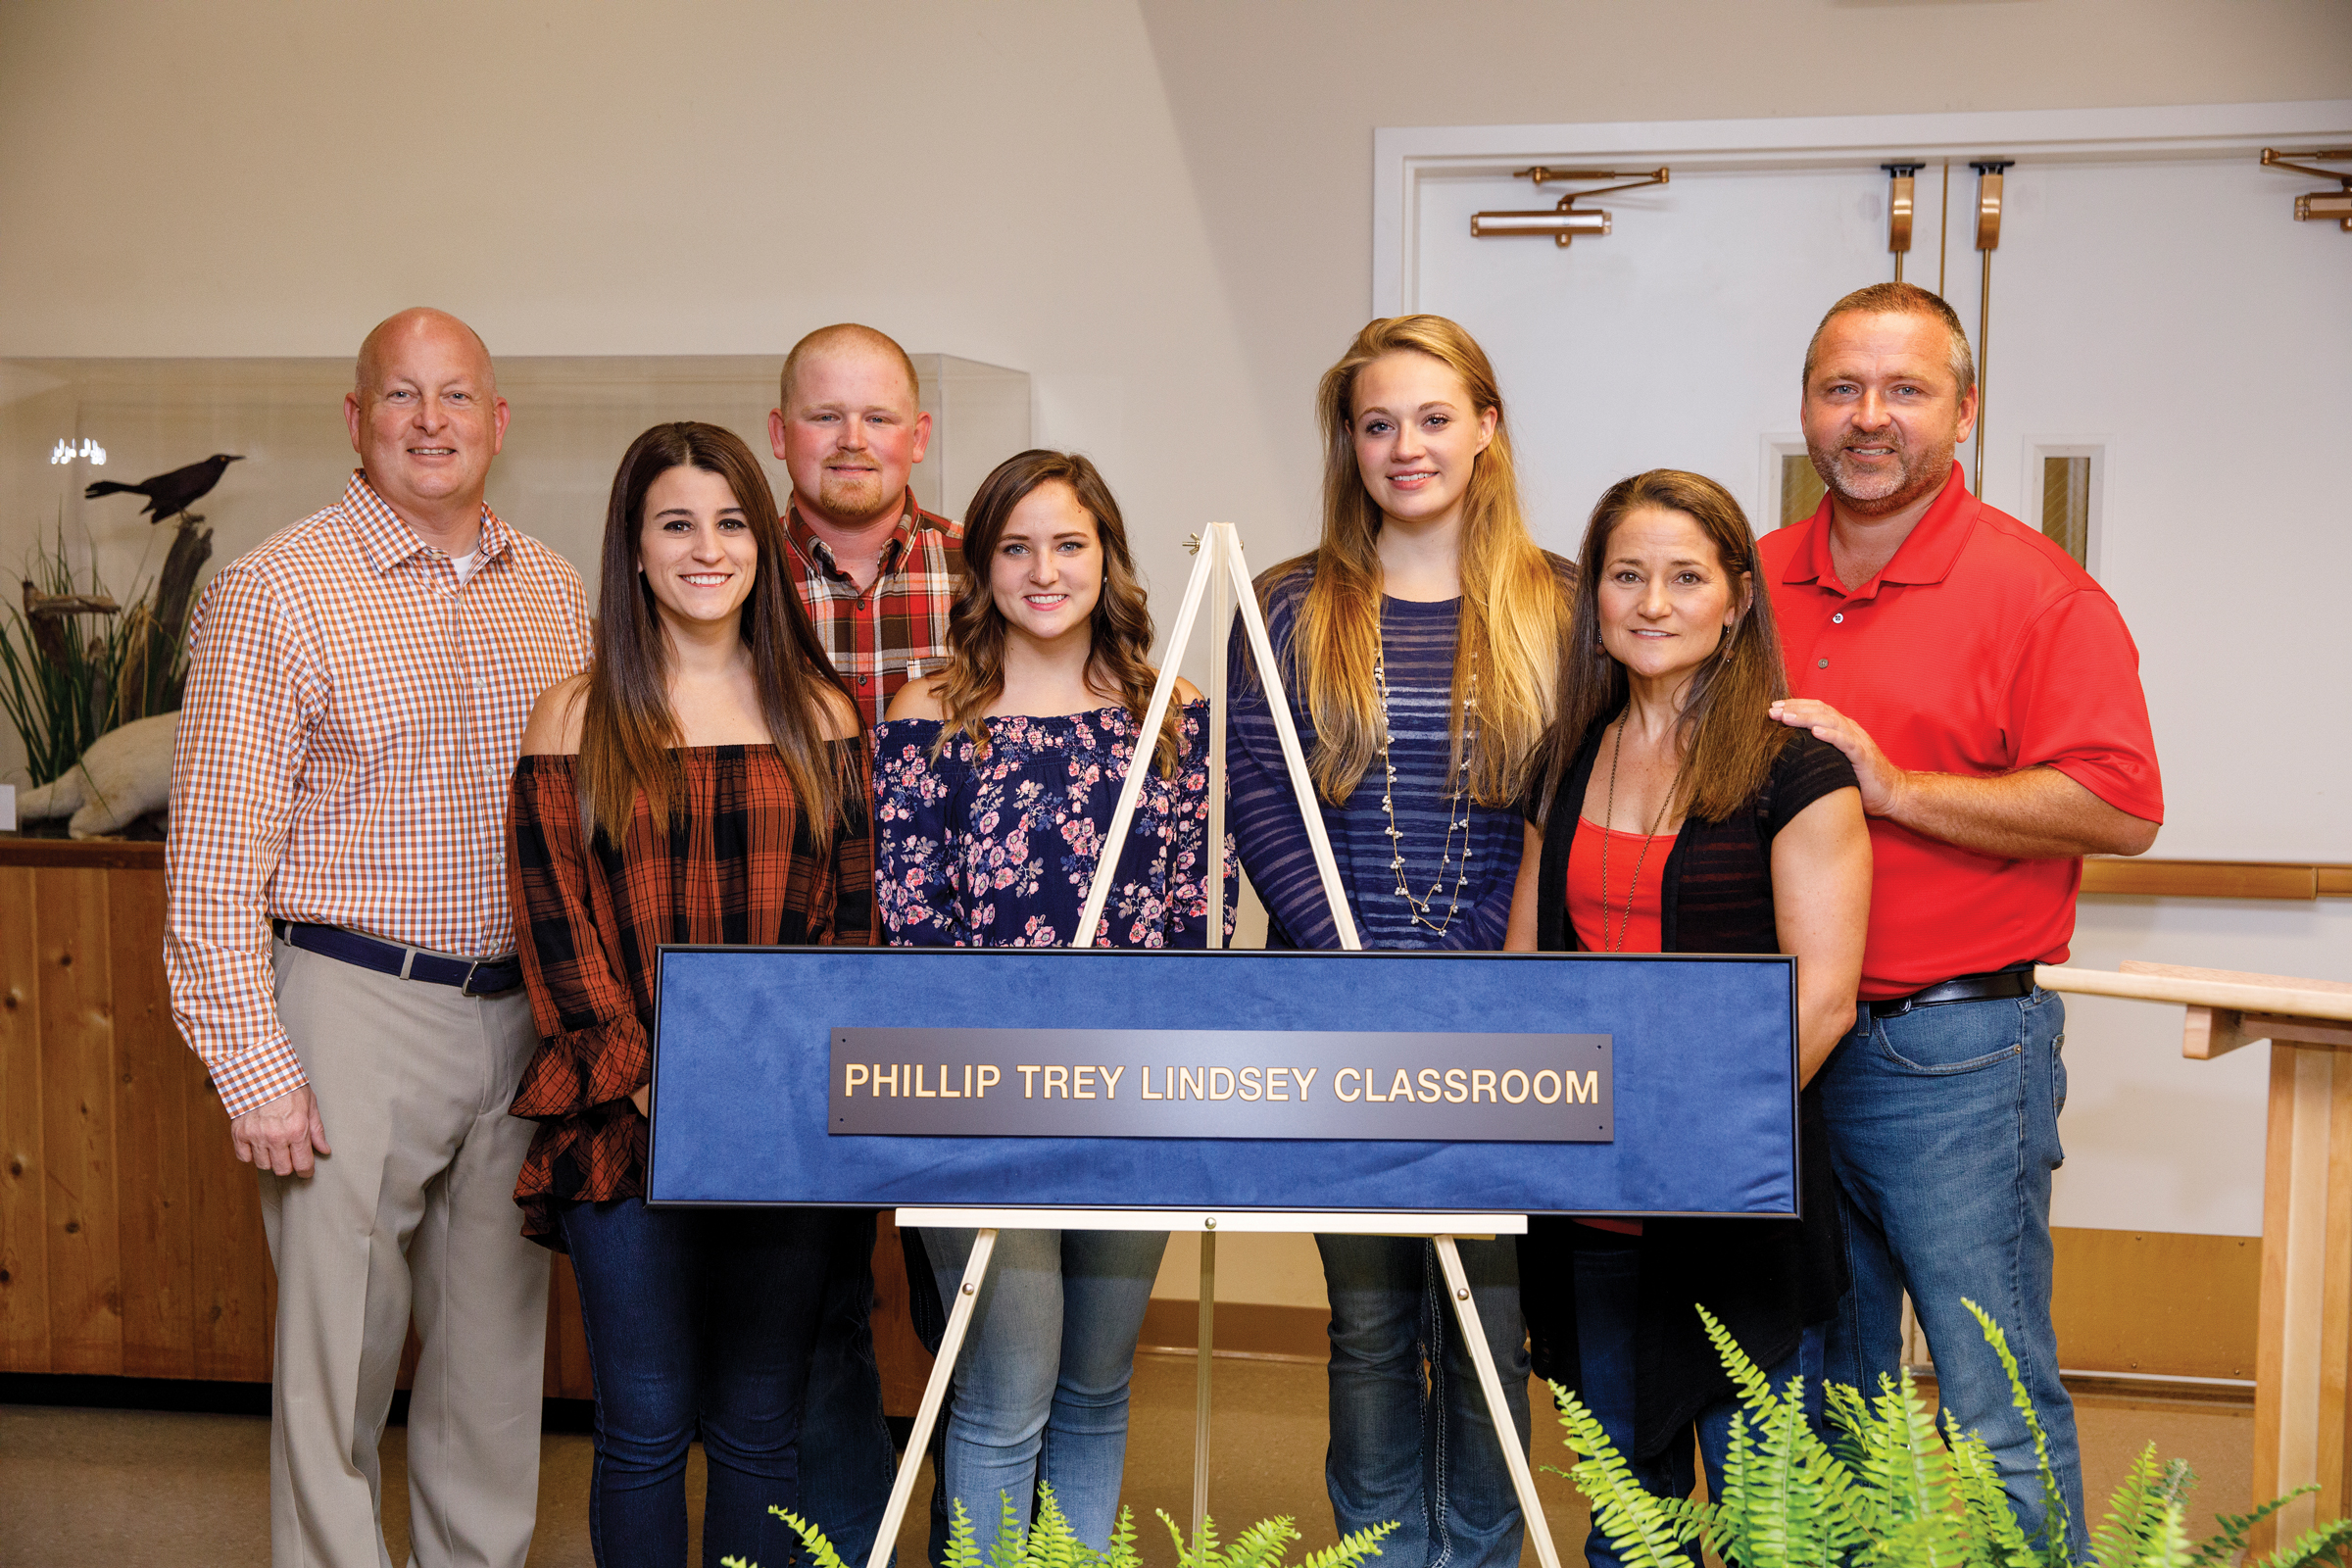 Keith Carver and the Lindsey family with the dedication plaque